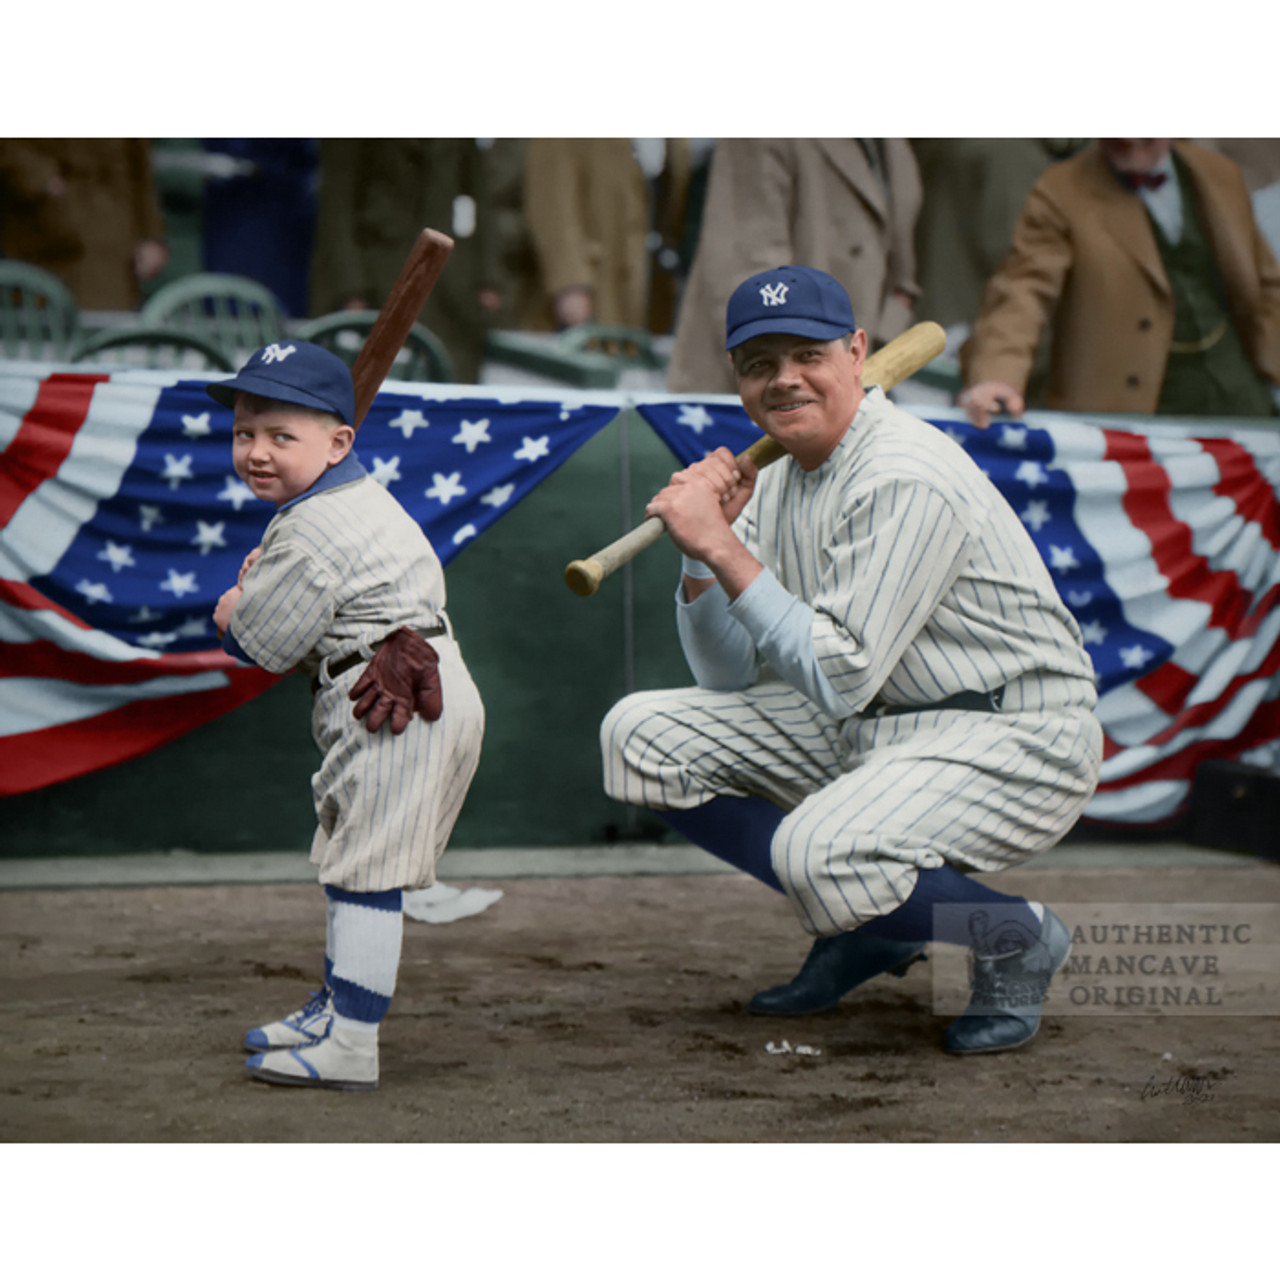 How would Babe Ruth and Ty Cobb have fared against each other if